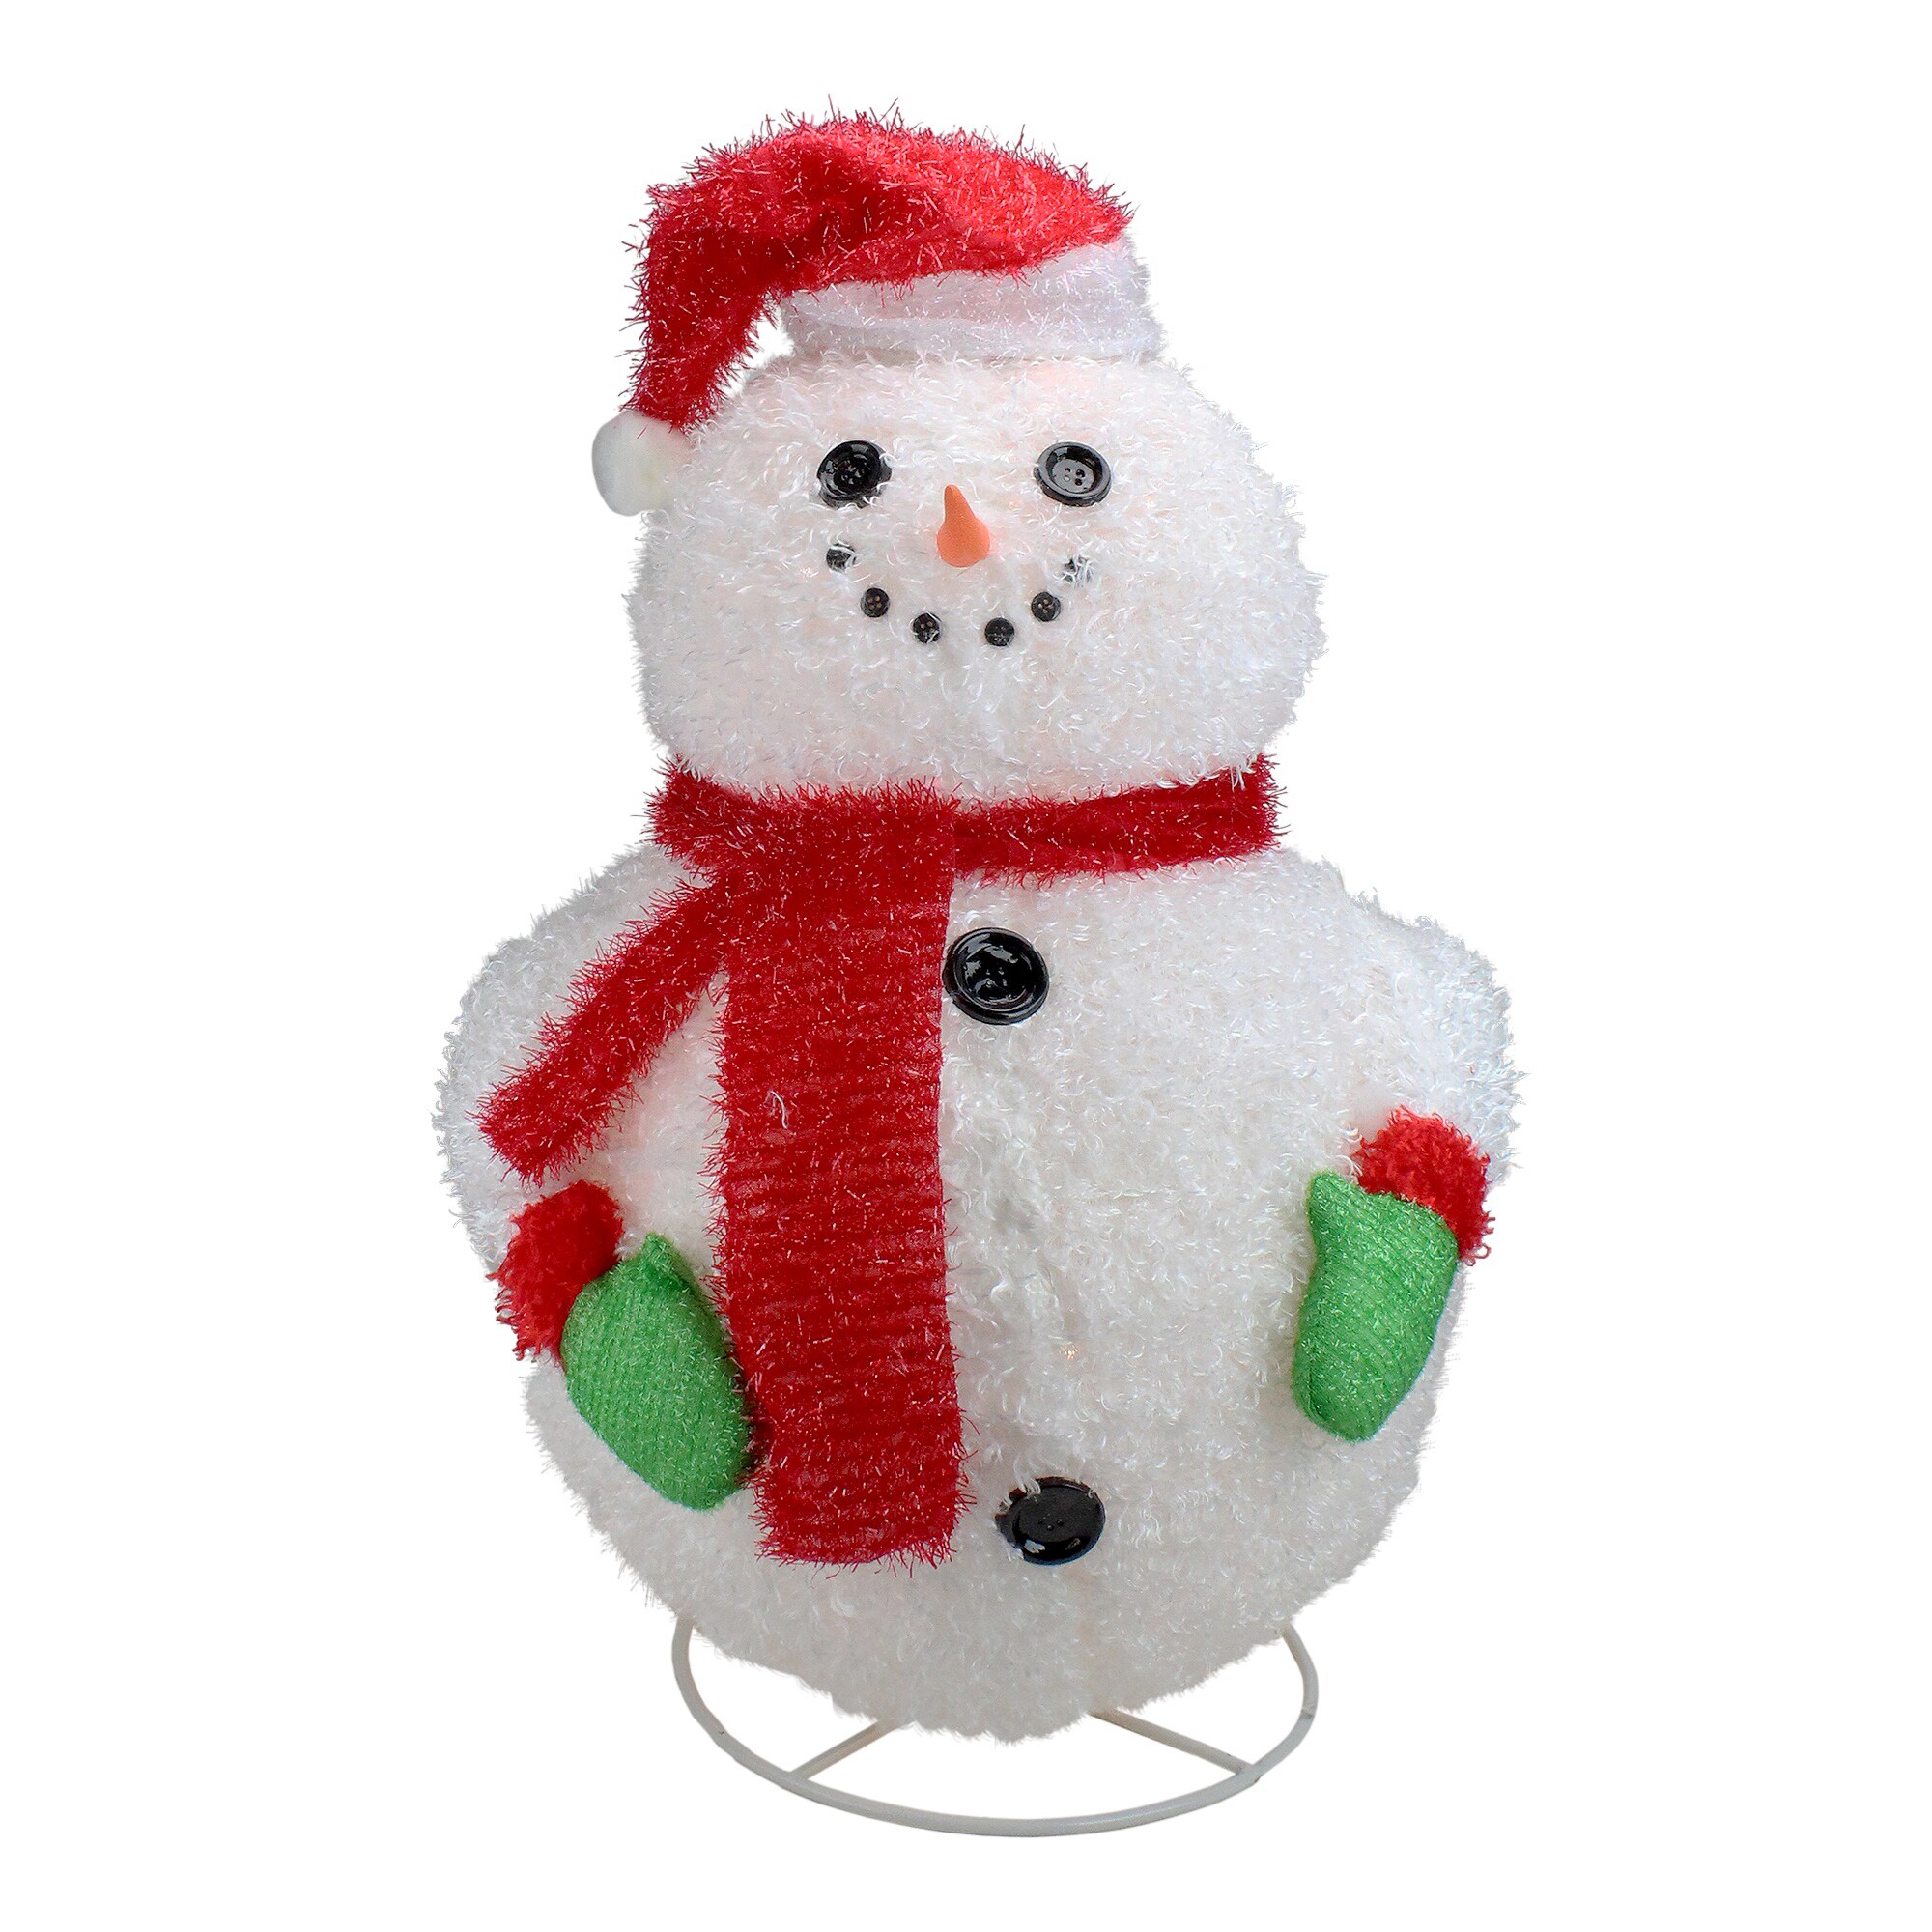 Snowman Christmas 24" Mailbox Topper Decor Holiday Decoration Gift New 